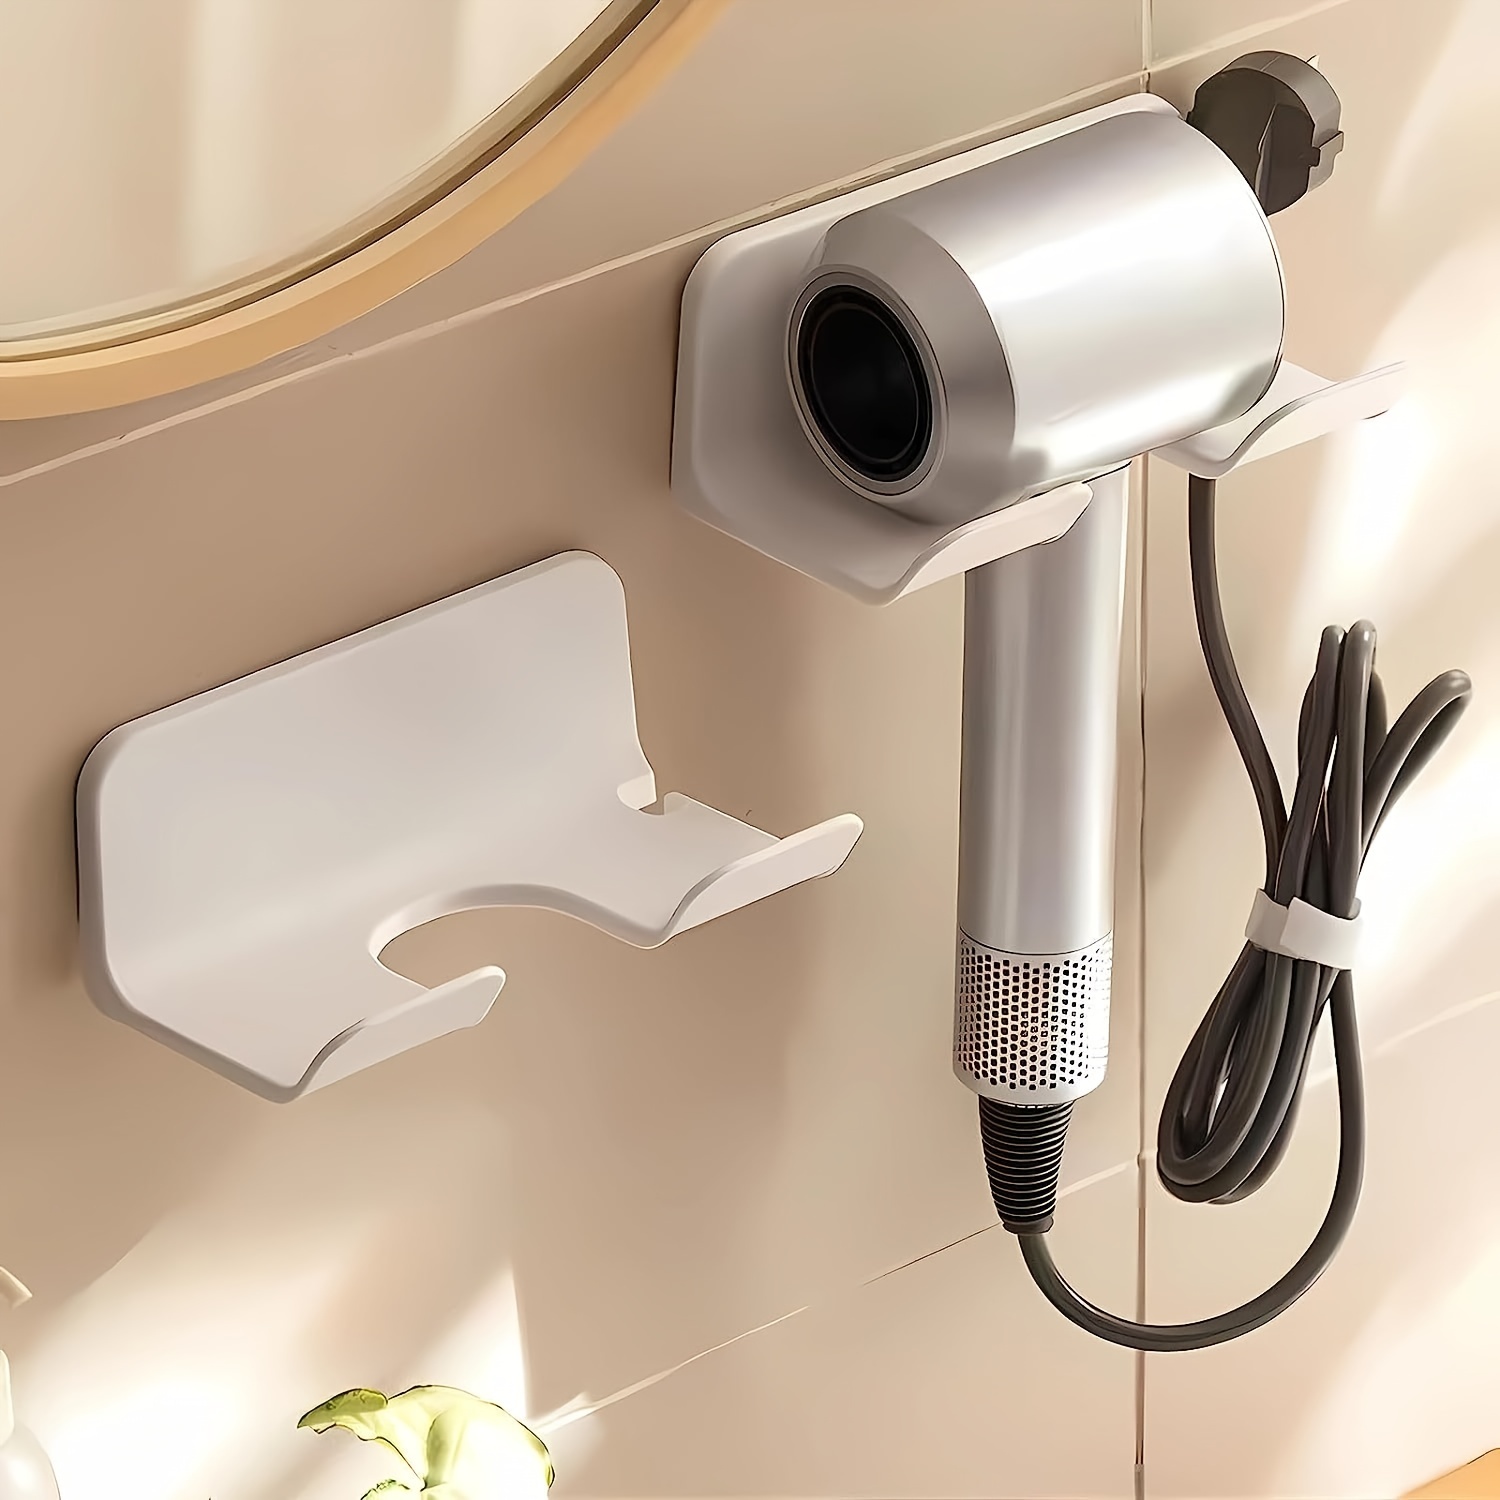 

1pc Hair Dryer Holder With Plug Hook, Wall Mounted Punch Free Bathroom Shortage Rack, Styling Tool Organizer For Easy Access And Convenience